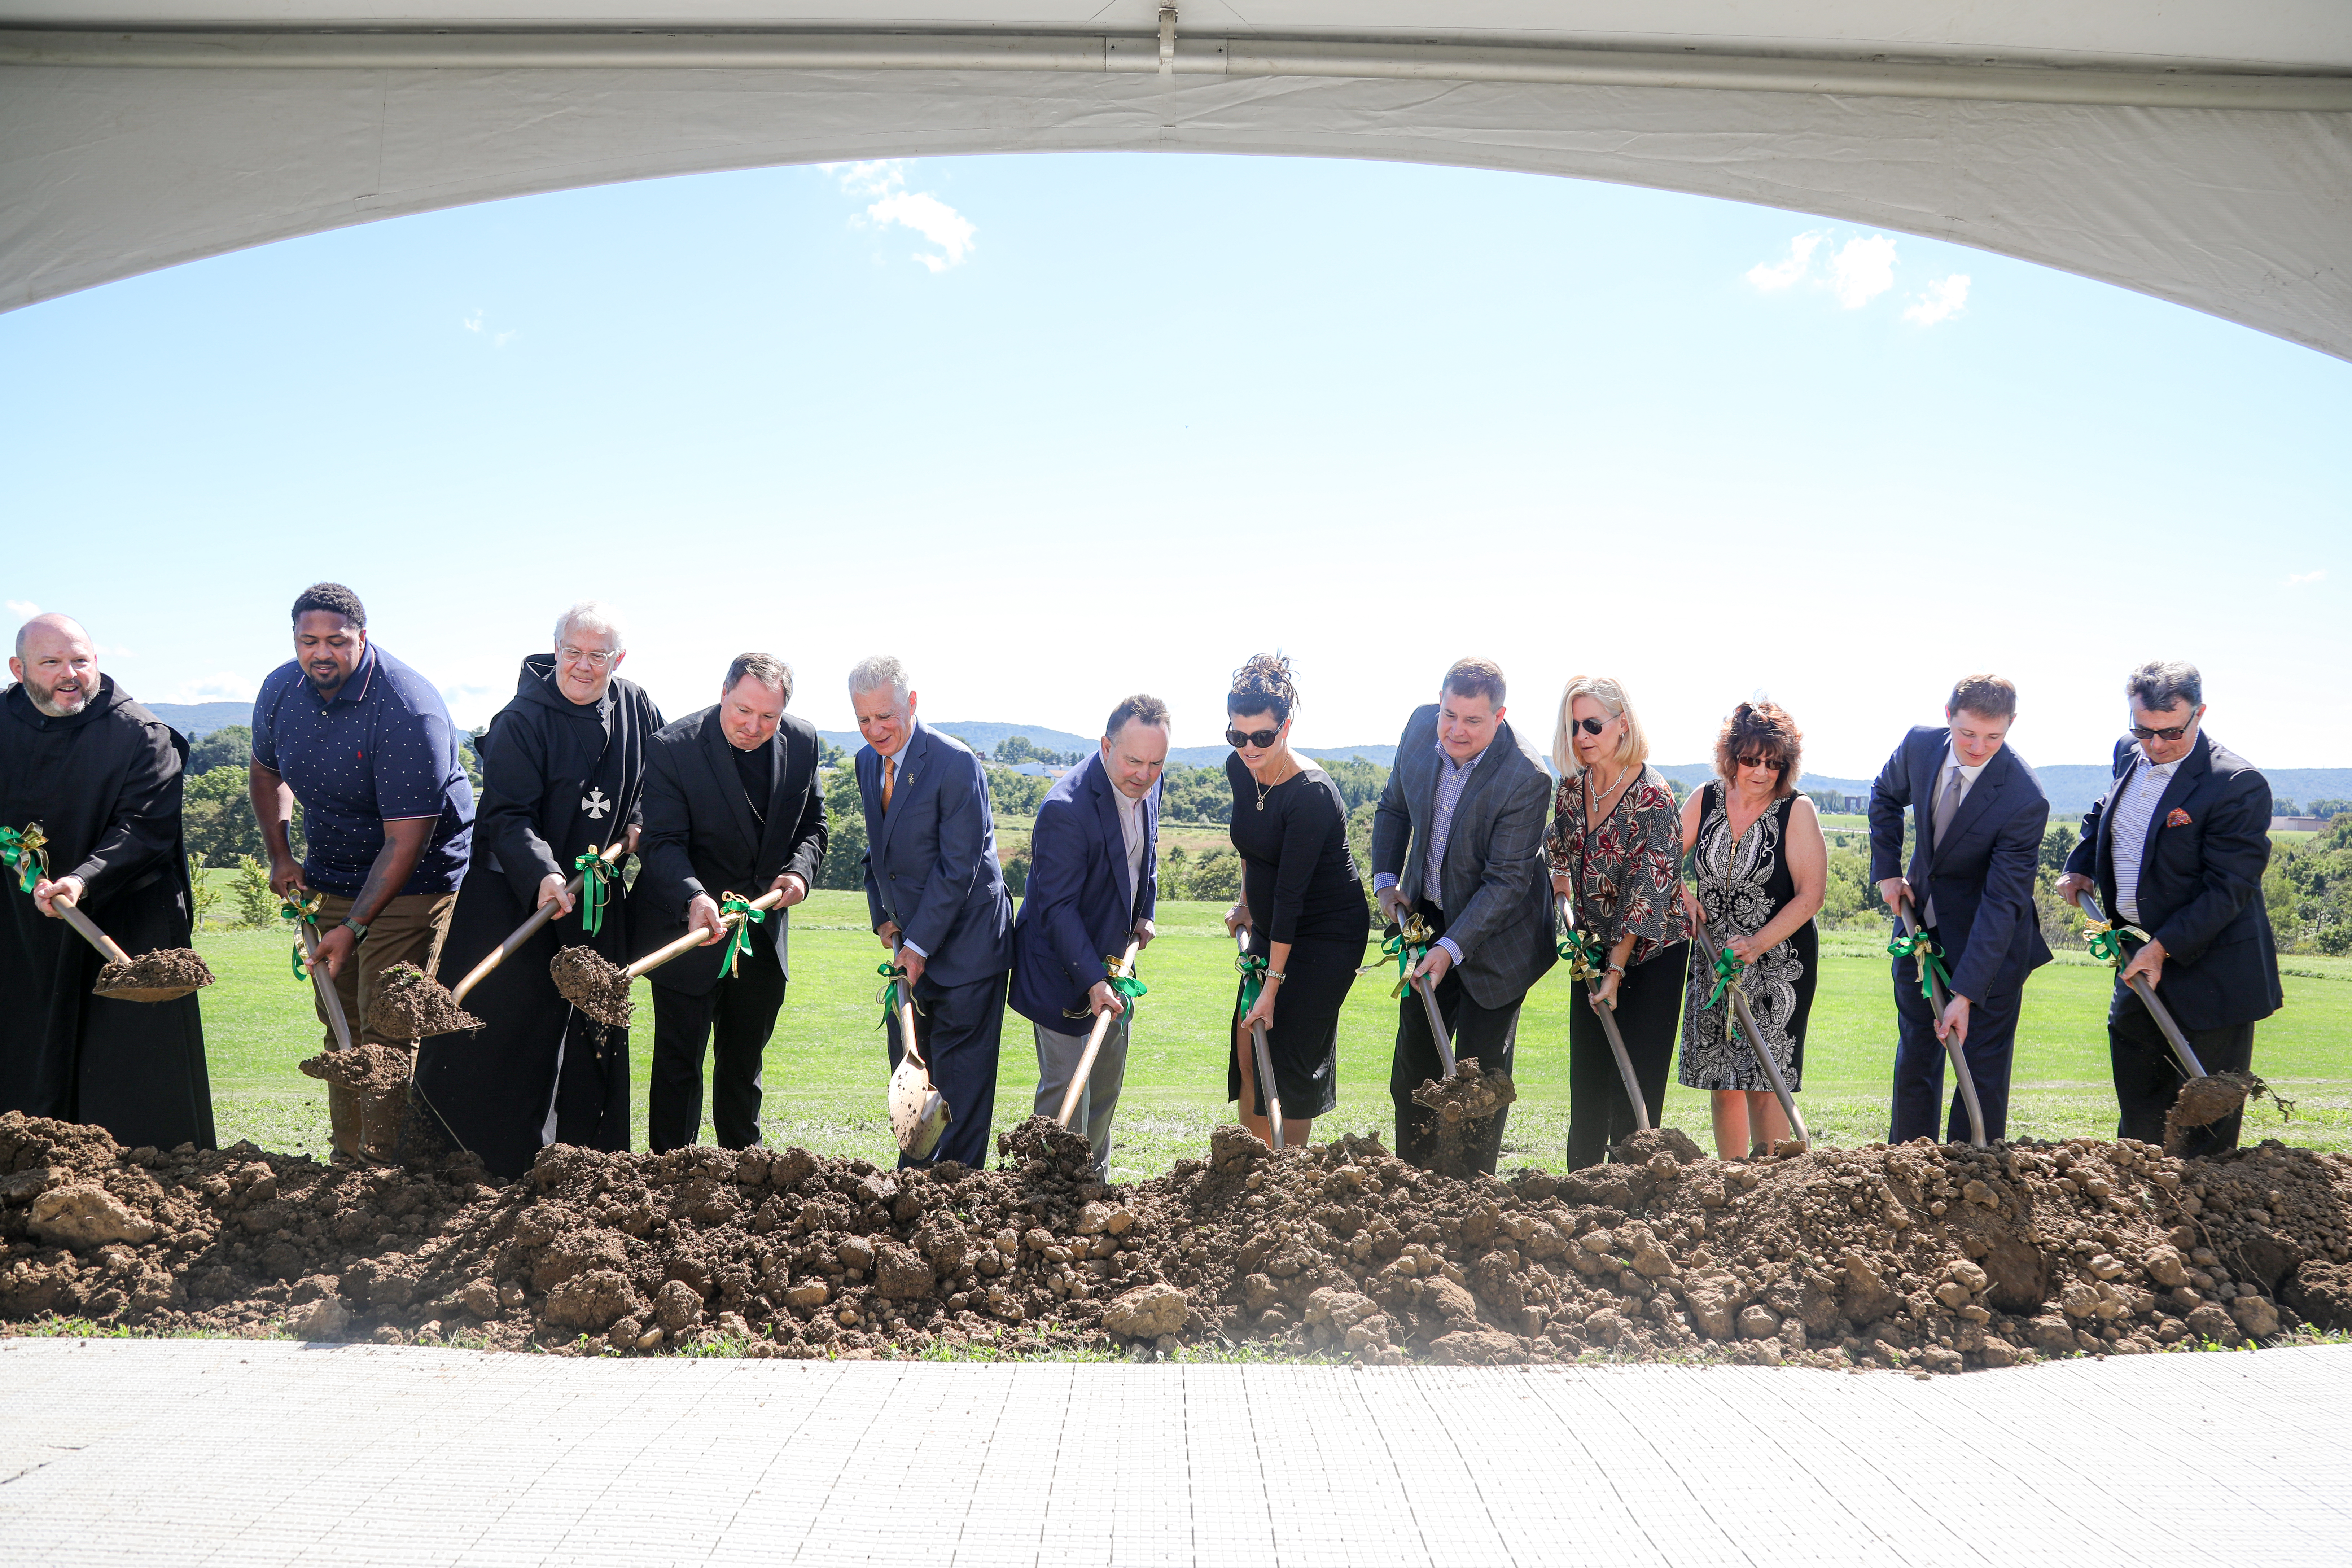 Saint Vincent College breaks ground on Dunlap Family Athletic and Recreation Center